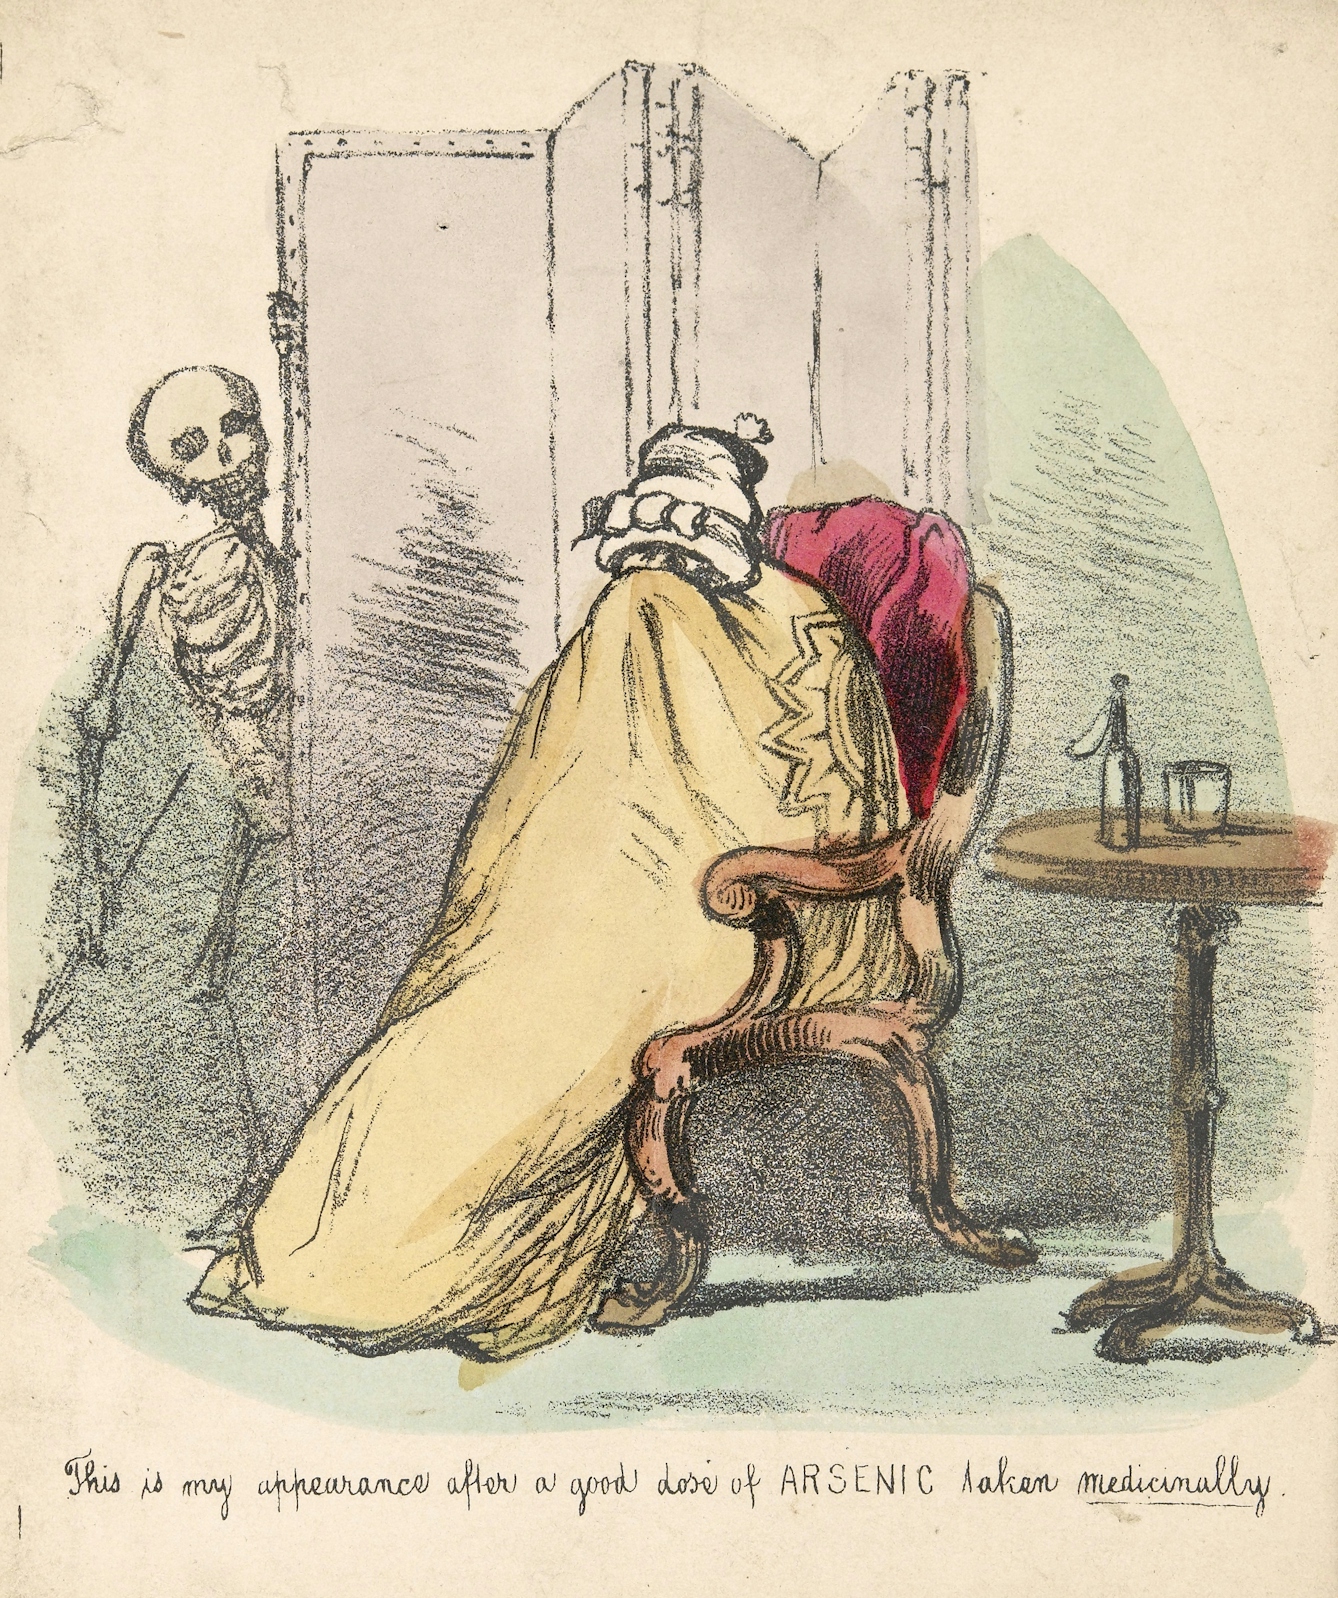 A patient suffering adverse effects of arsenic treatment with a skeleton peering round a screen behind the patient